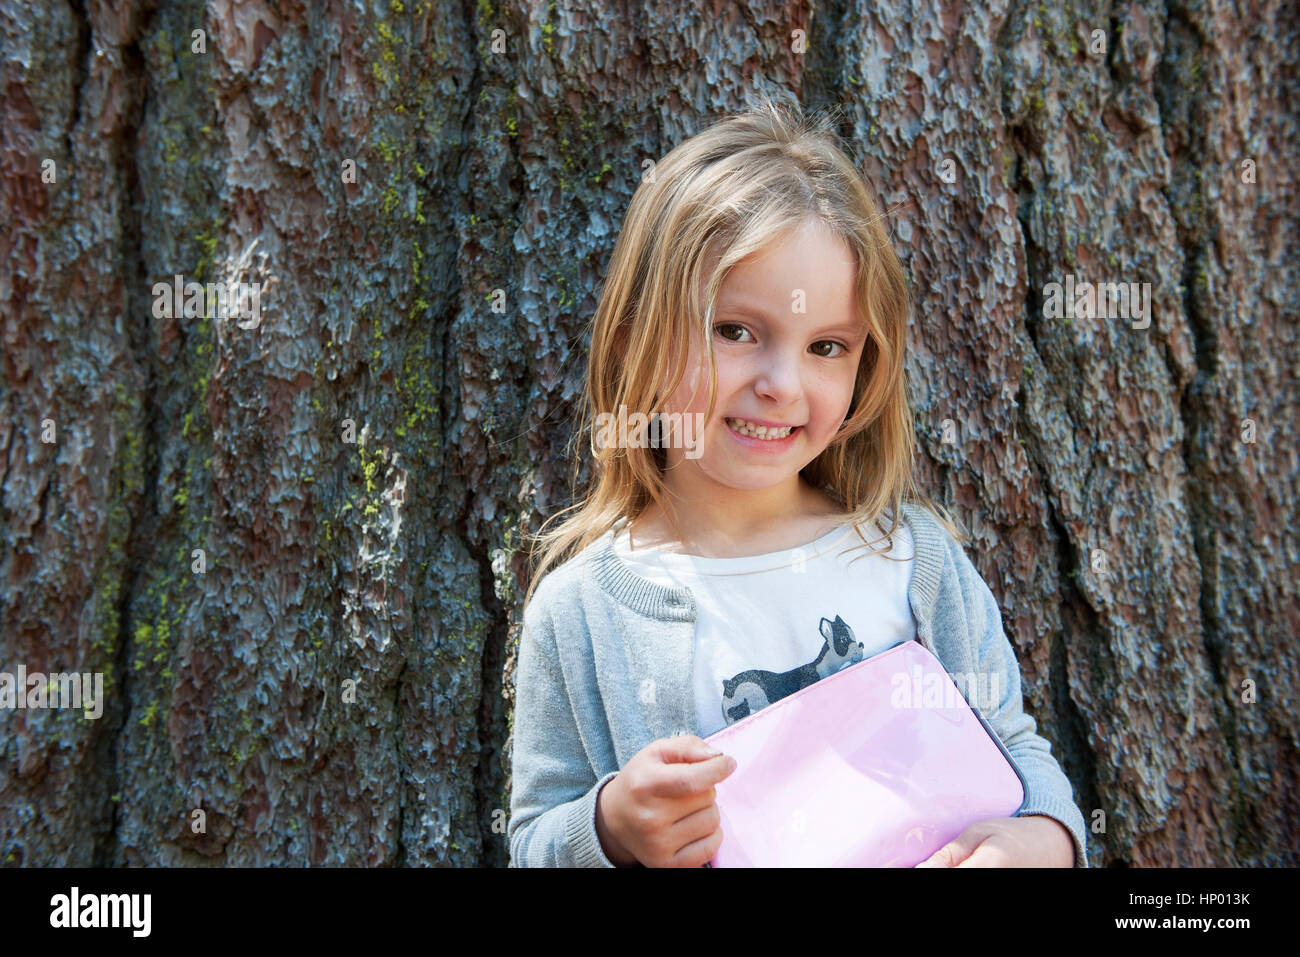 Girl leaning against tree trunk, smiling cheerfully Stock Photo